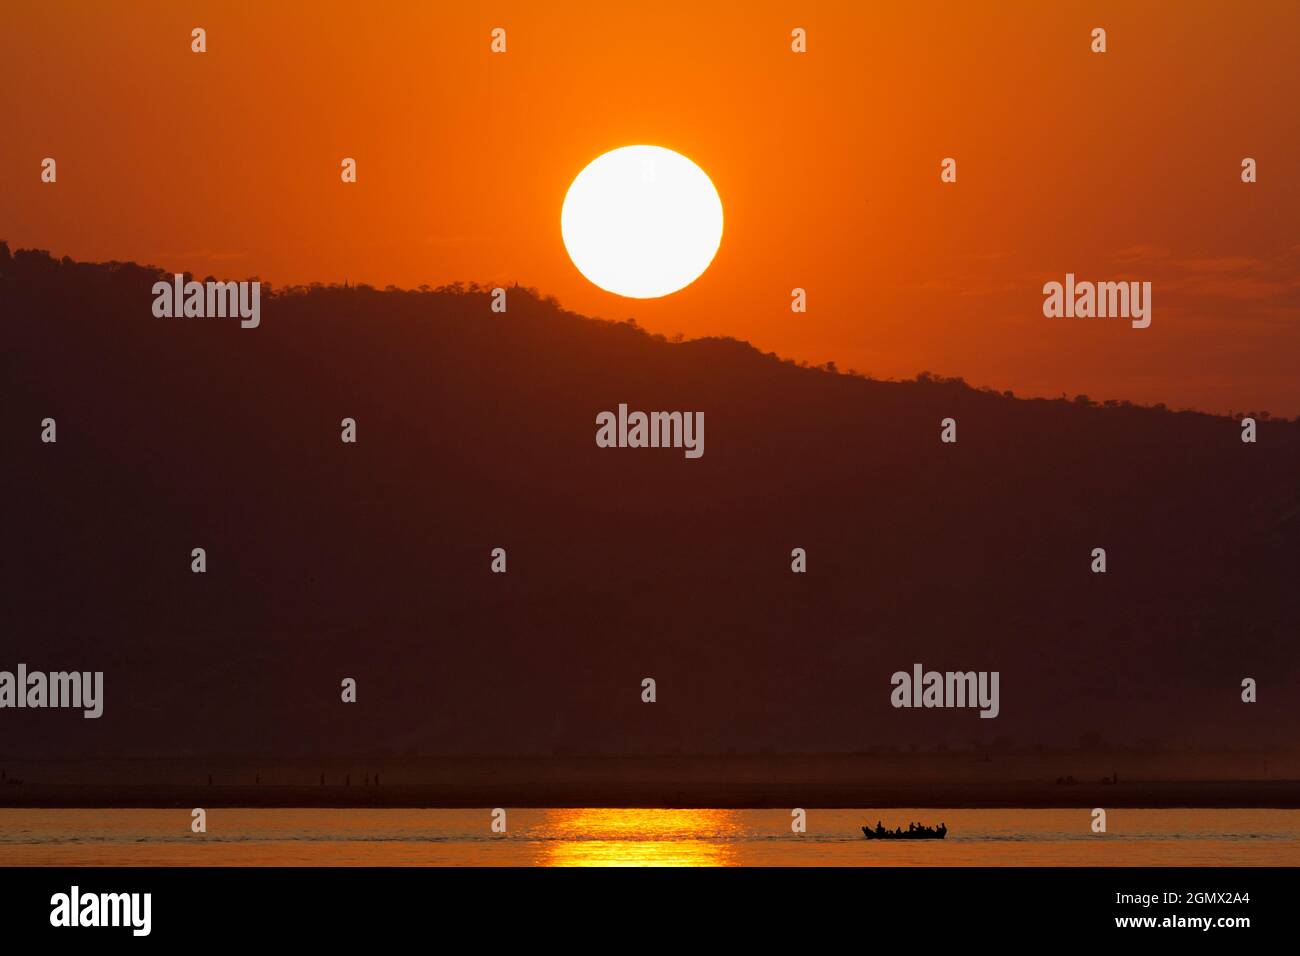 Mandalay, Myanmar - 29 January 2013. Sublime sunset over the Irrawaddy  River, viewed from Mandalay Hill. As the beloved old Kipling poem 'The Road  to Stock Photo - Alamy